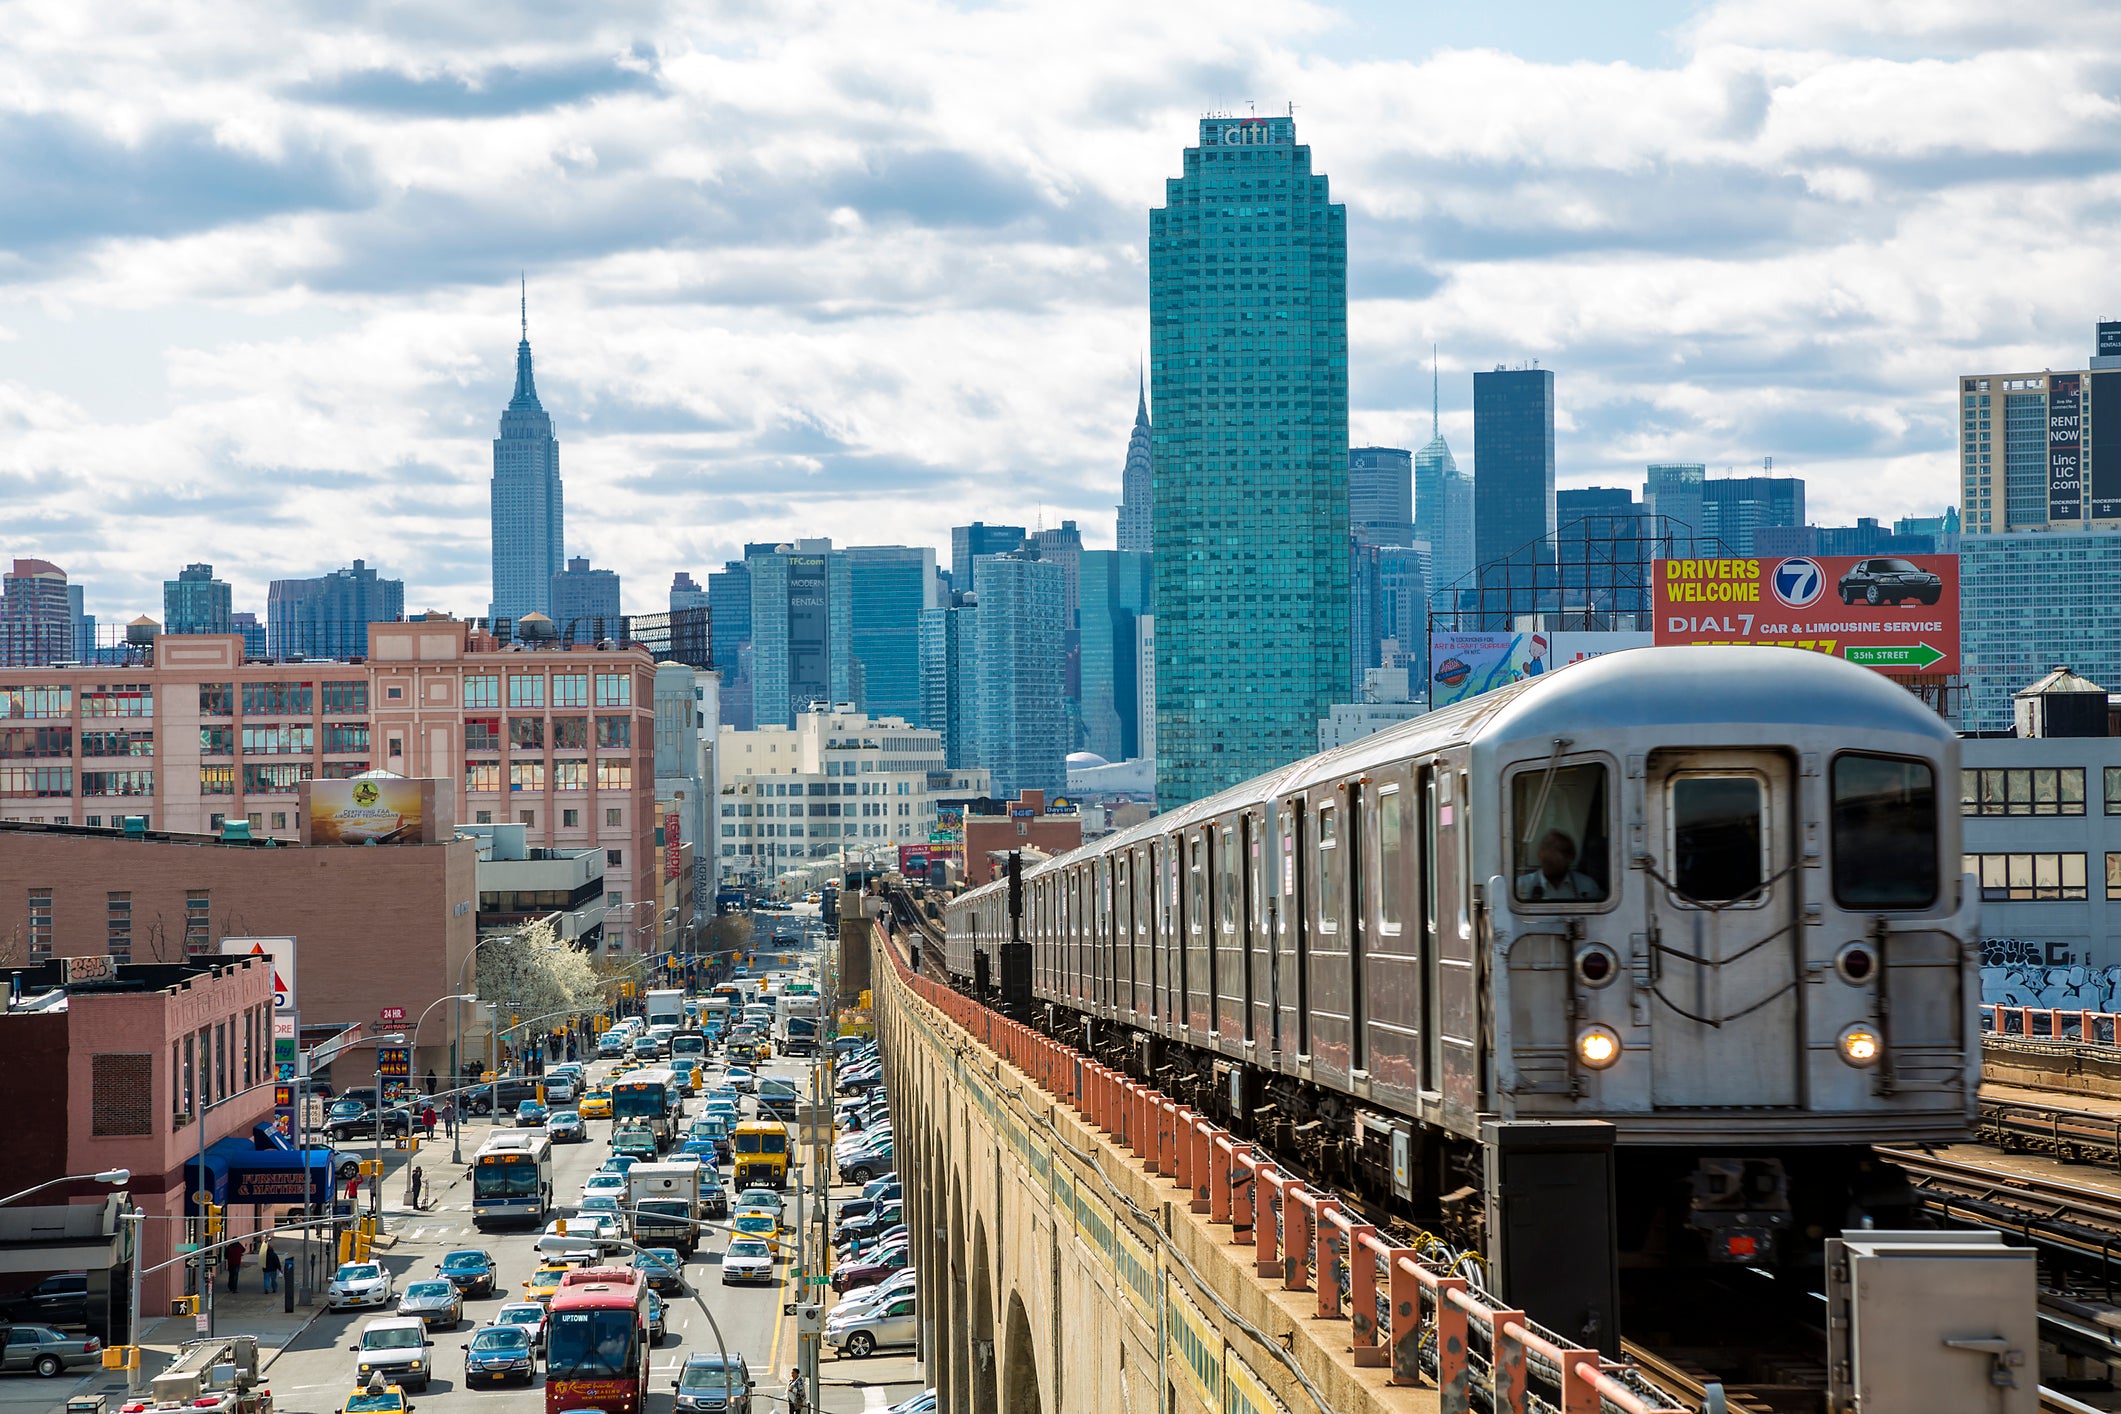 Reduce your carbon footprint and see New York by rail